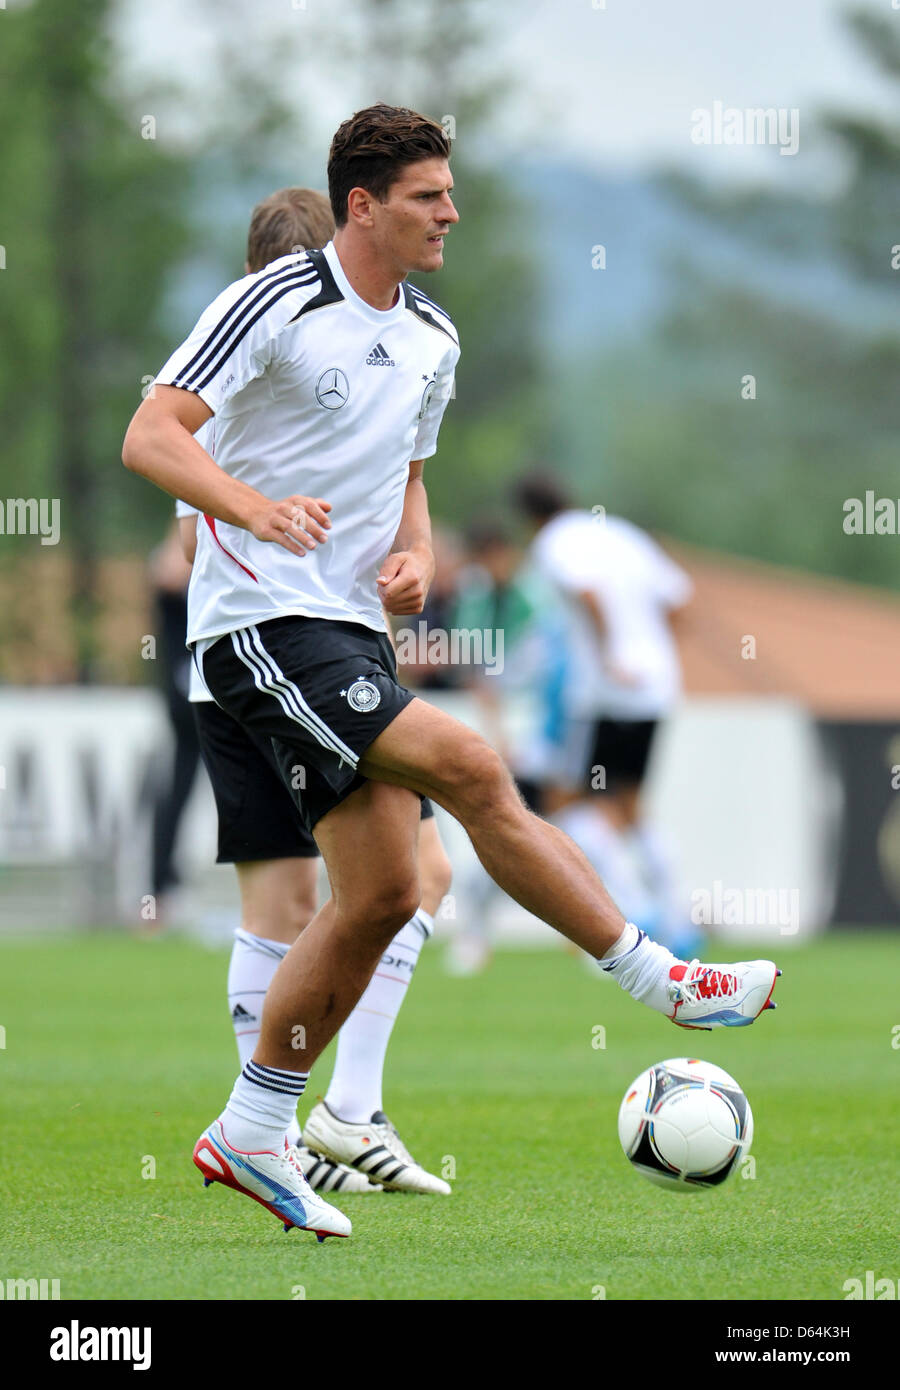 Germany's Mario Gomez warms up during practice on a pitch in Tourettes, France, 29 May 2012. The German national soccer team is preparing for the Euro 2012 at their training camp in southern France. Photo: ANDREAS GEBERT Stock Photo